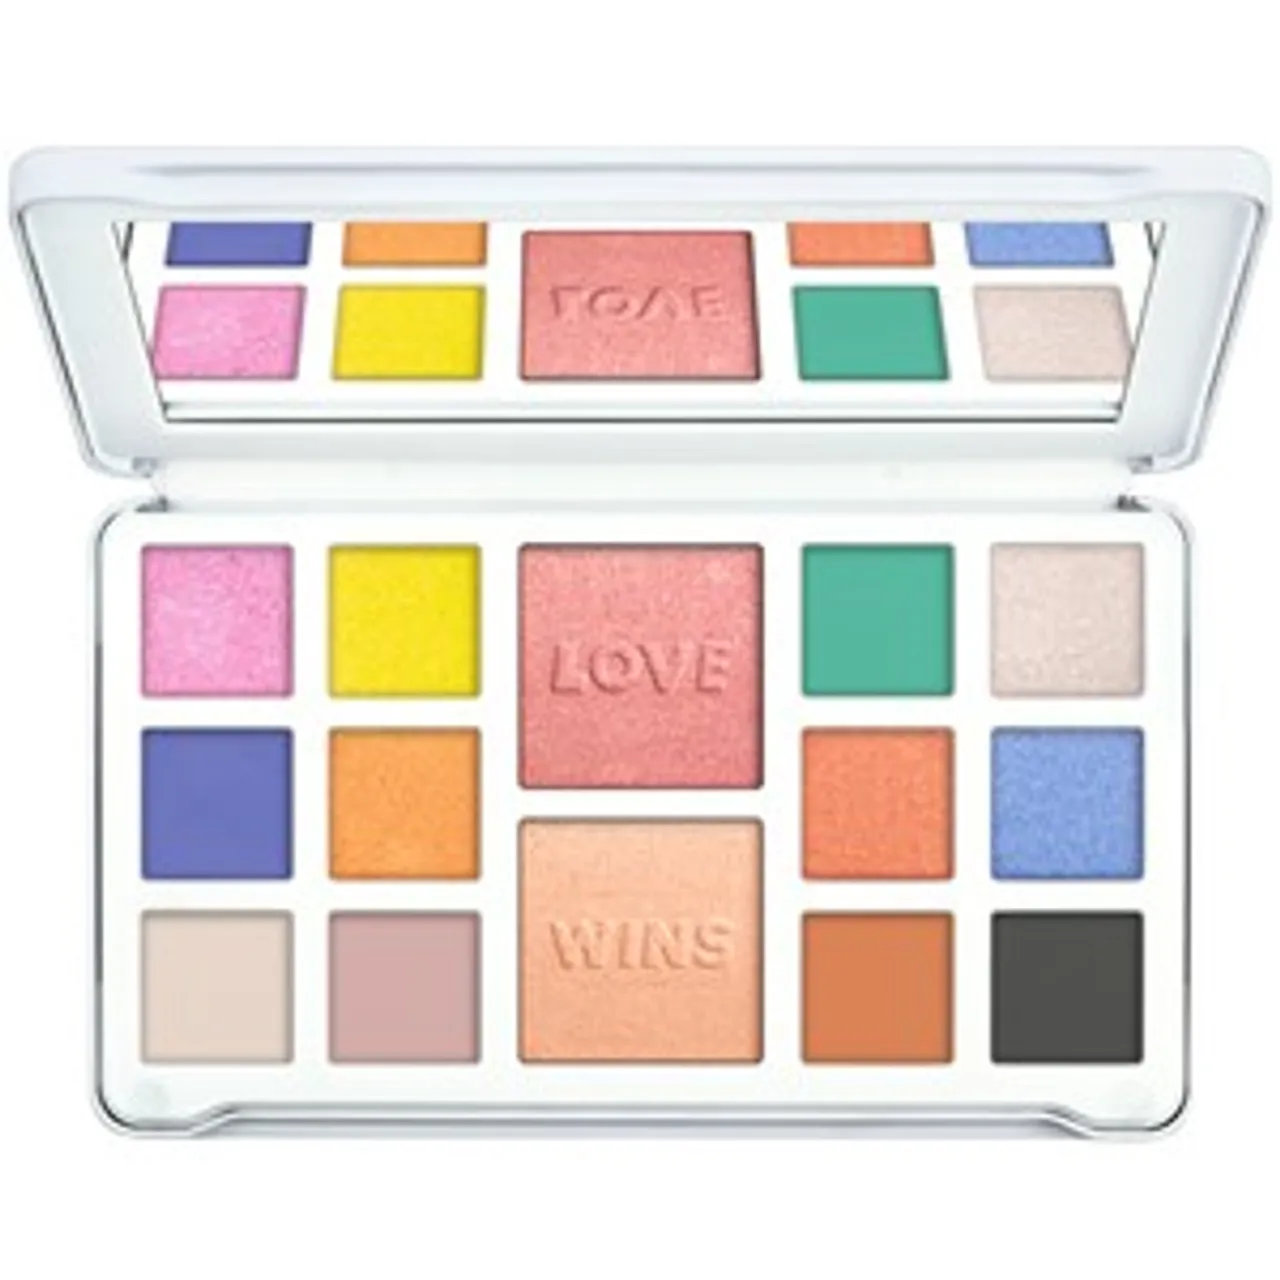 Catrice Eyeshadow & Face Palette 0 23.80 g